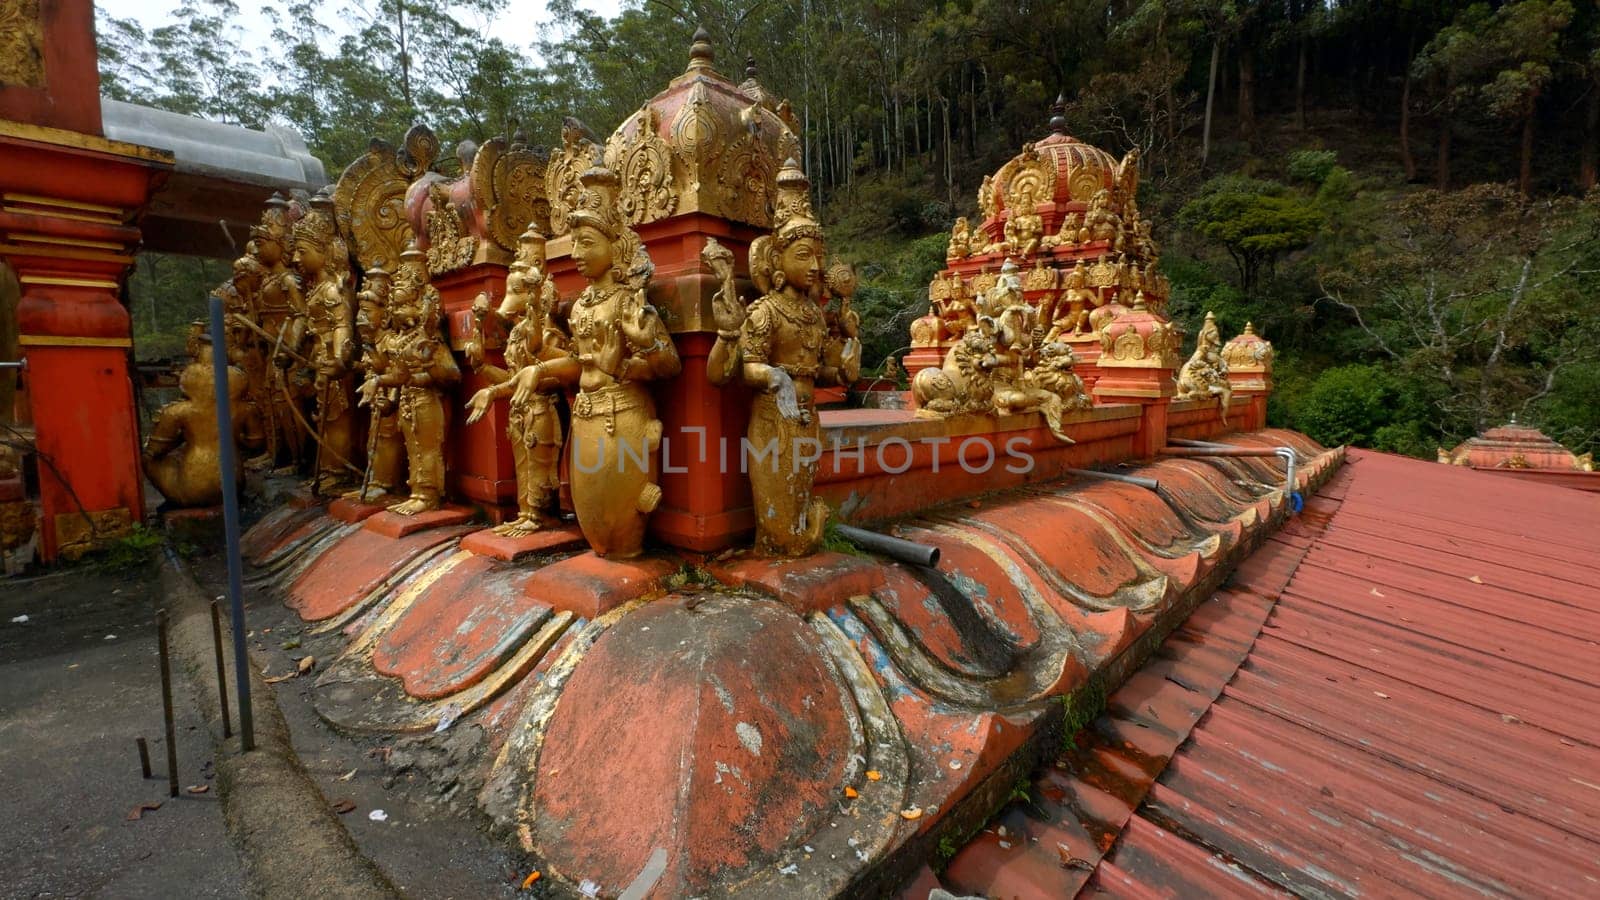 Malaysian temple with golden statues of the saints. Action. Concept of religion and culture